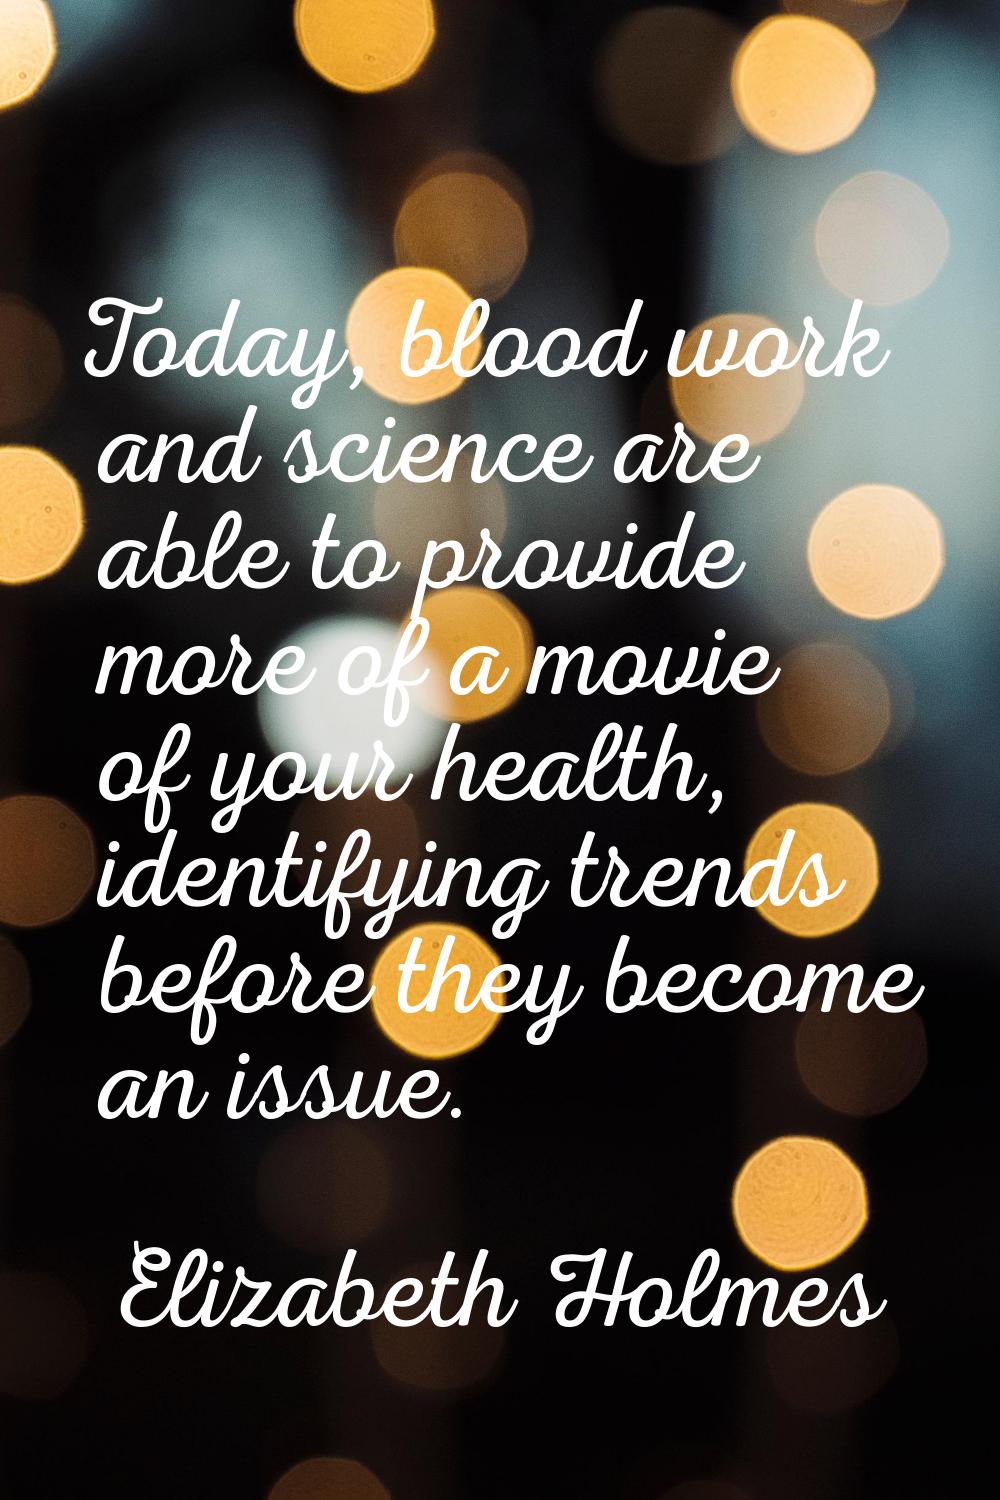 Today, blood work and science are able to provide more of a movie of your health, identifying trend